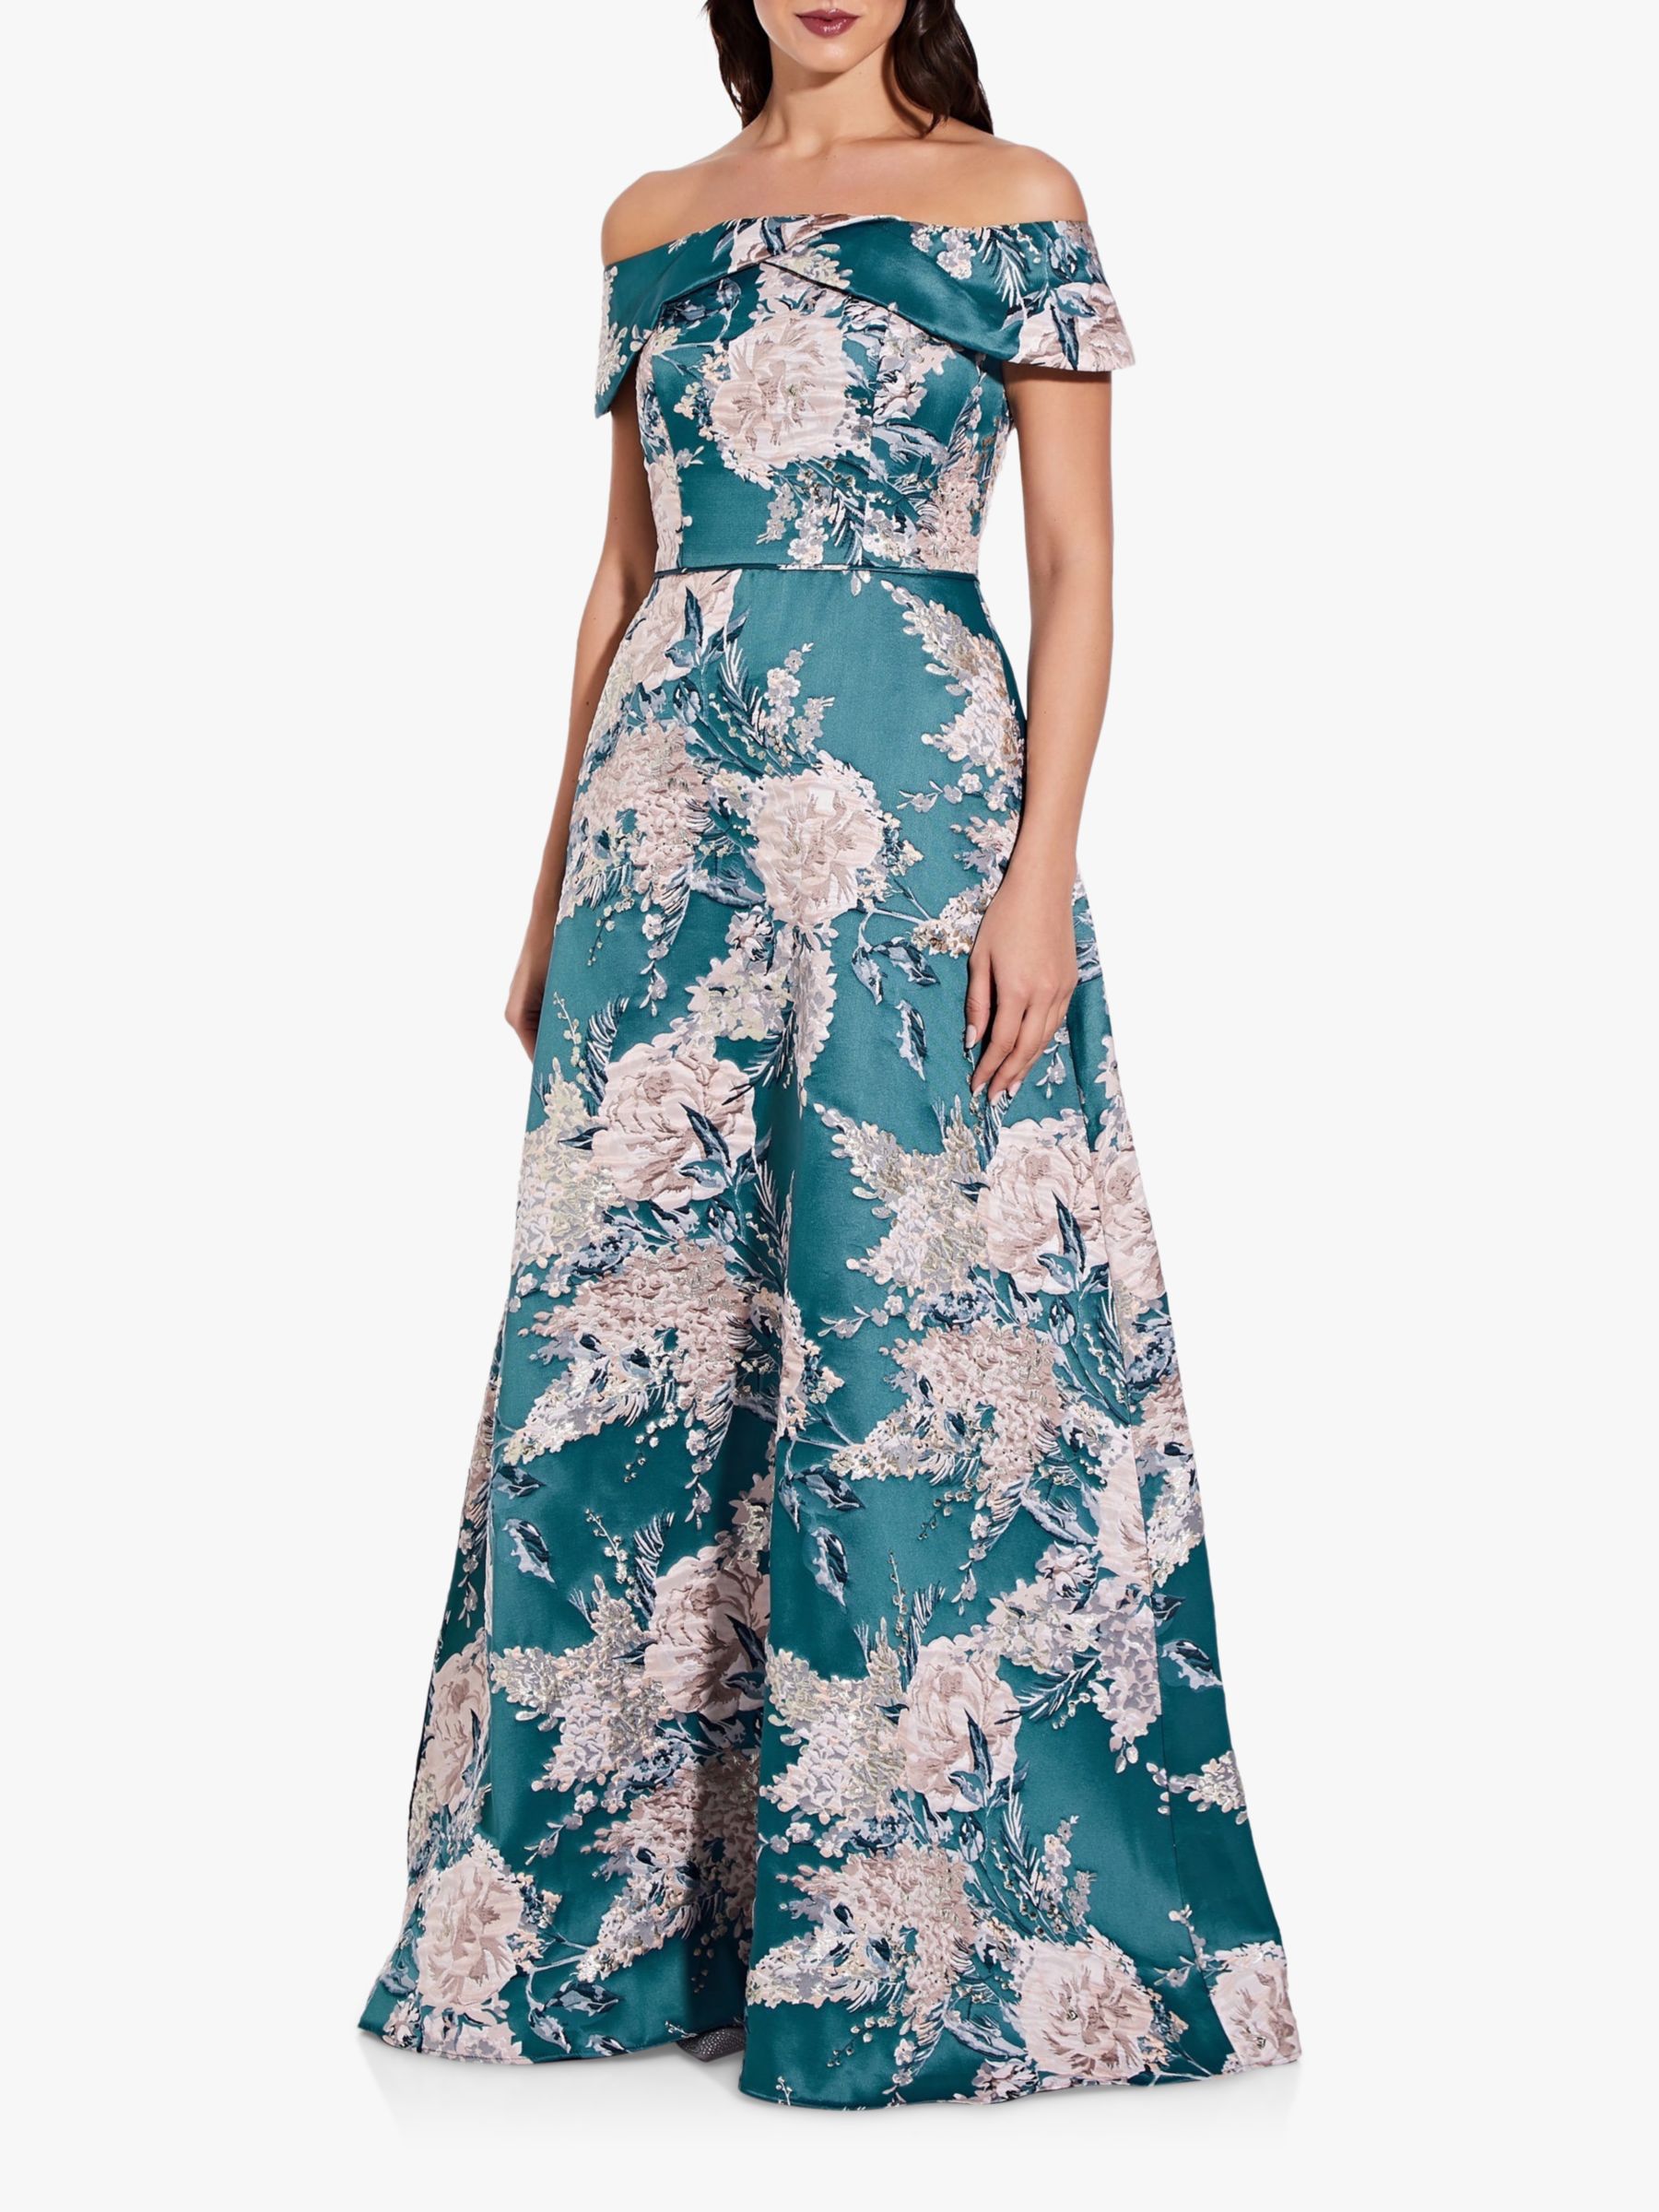 Adrianna Papell Off Shoulder Floral Print Jacquard Gown, Teal/Multi at ...